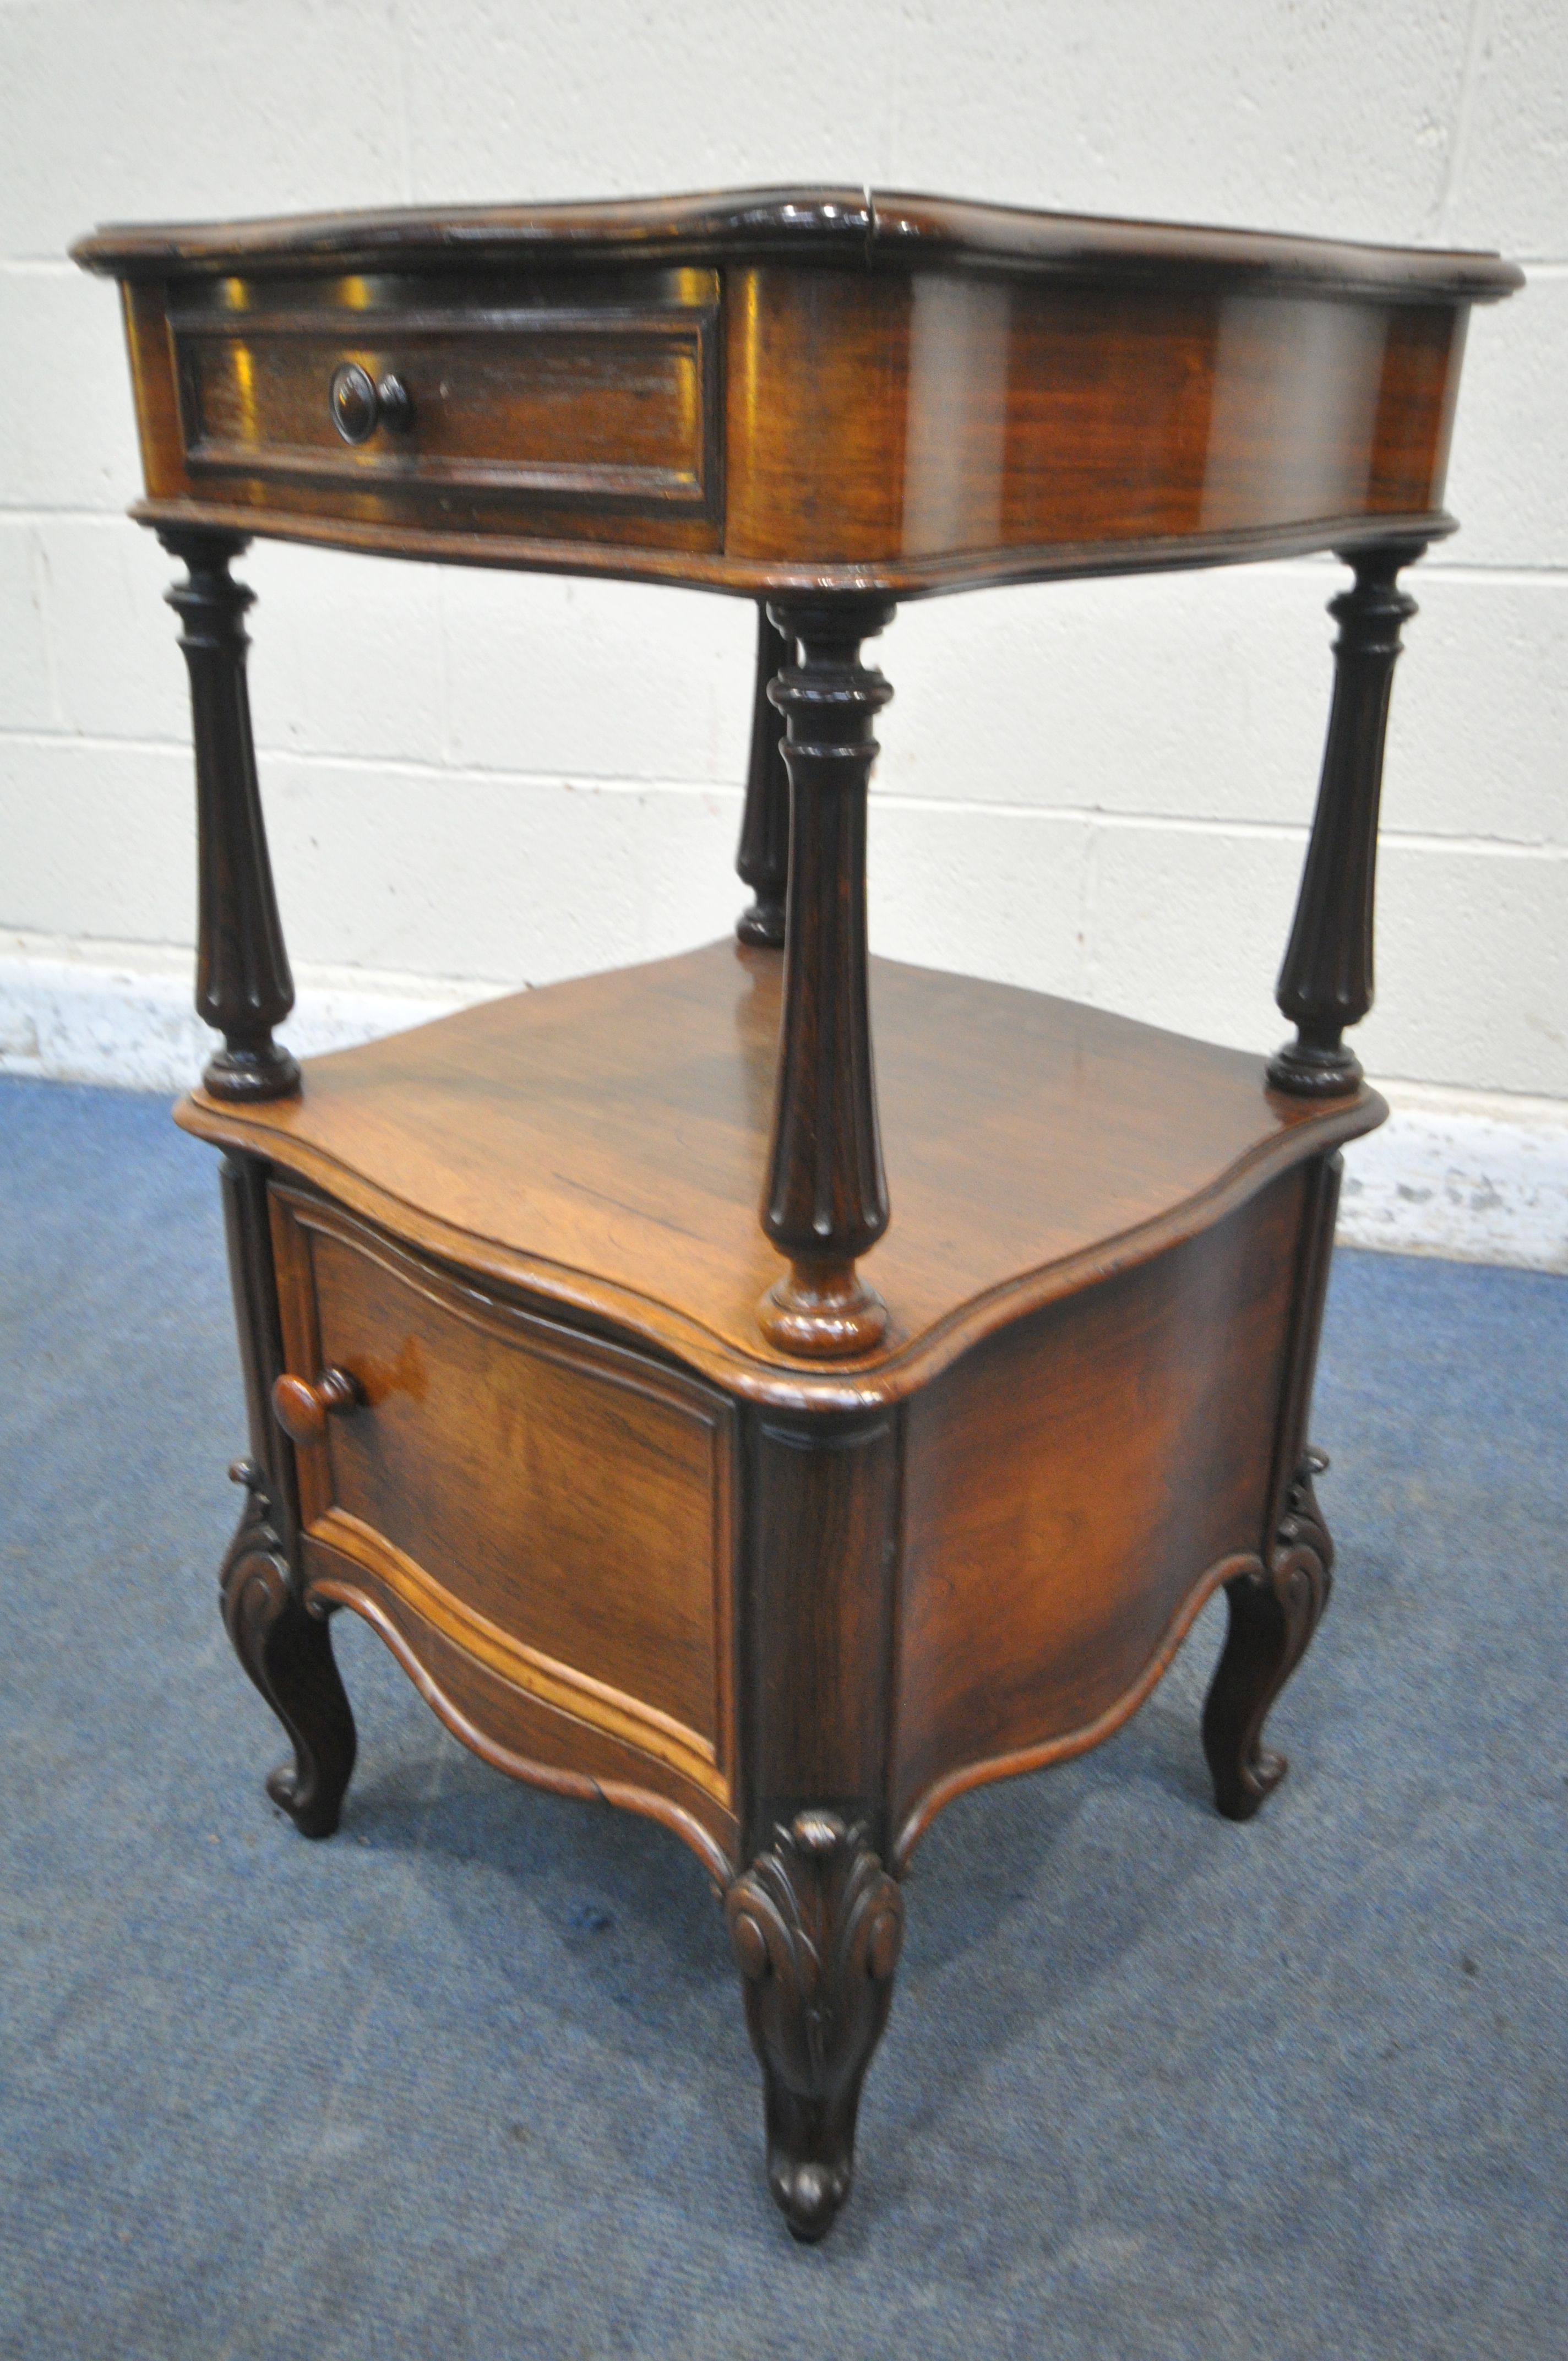 A VICTORIAN STYLE ROSEWOOD VENEER SERPENTINE LAMP TABLE, with a marquetry inlaid top, single drawer, - Image 4 of 6